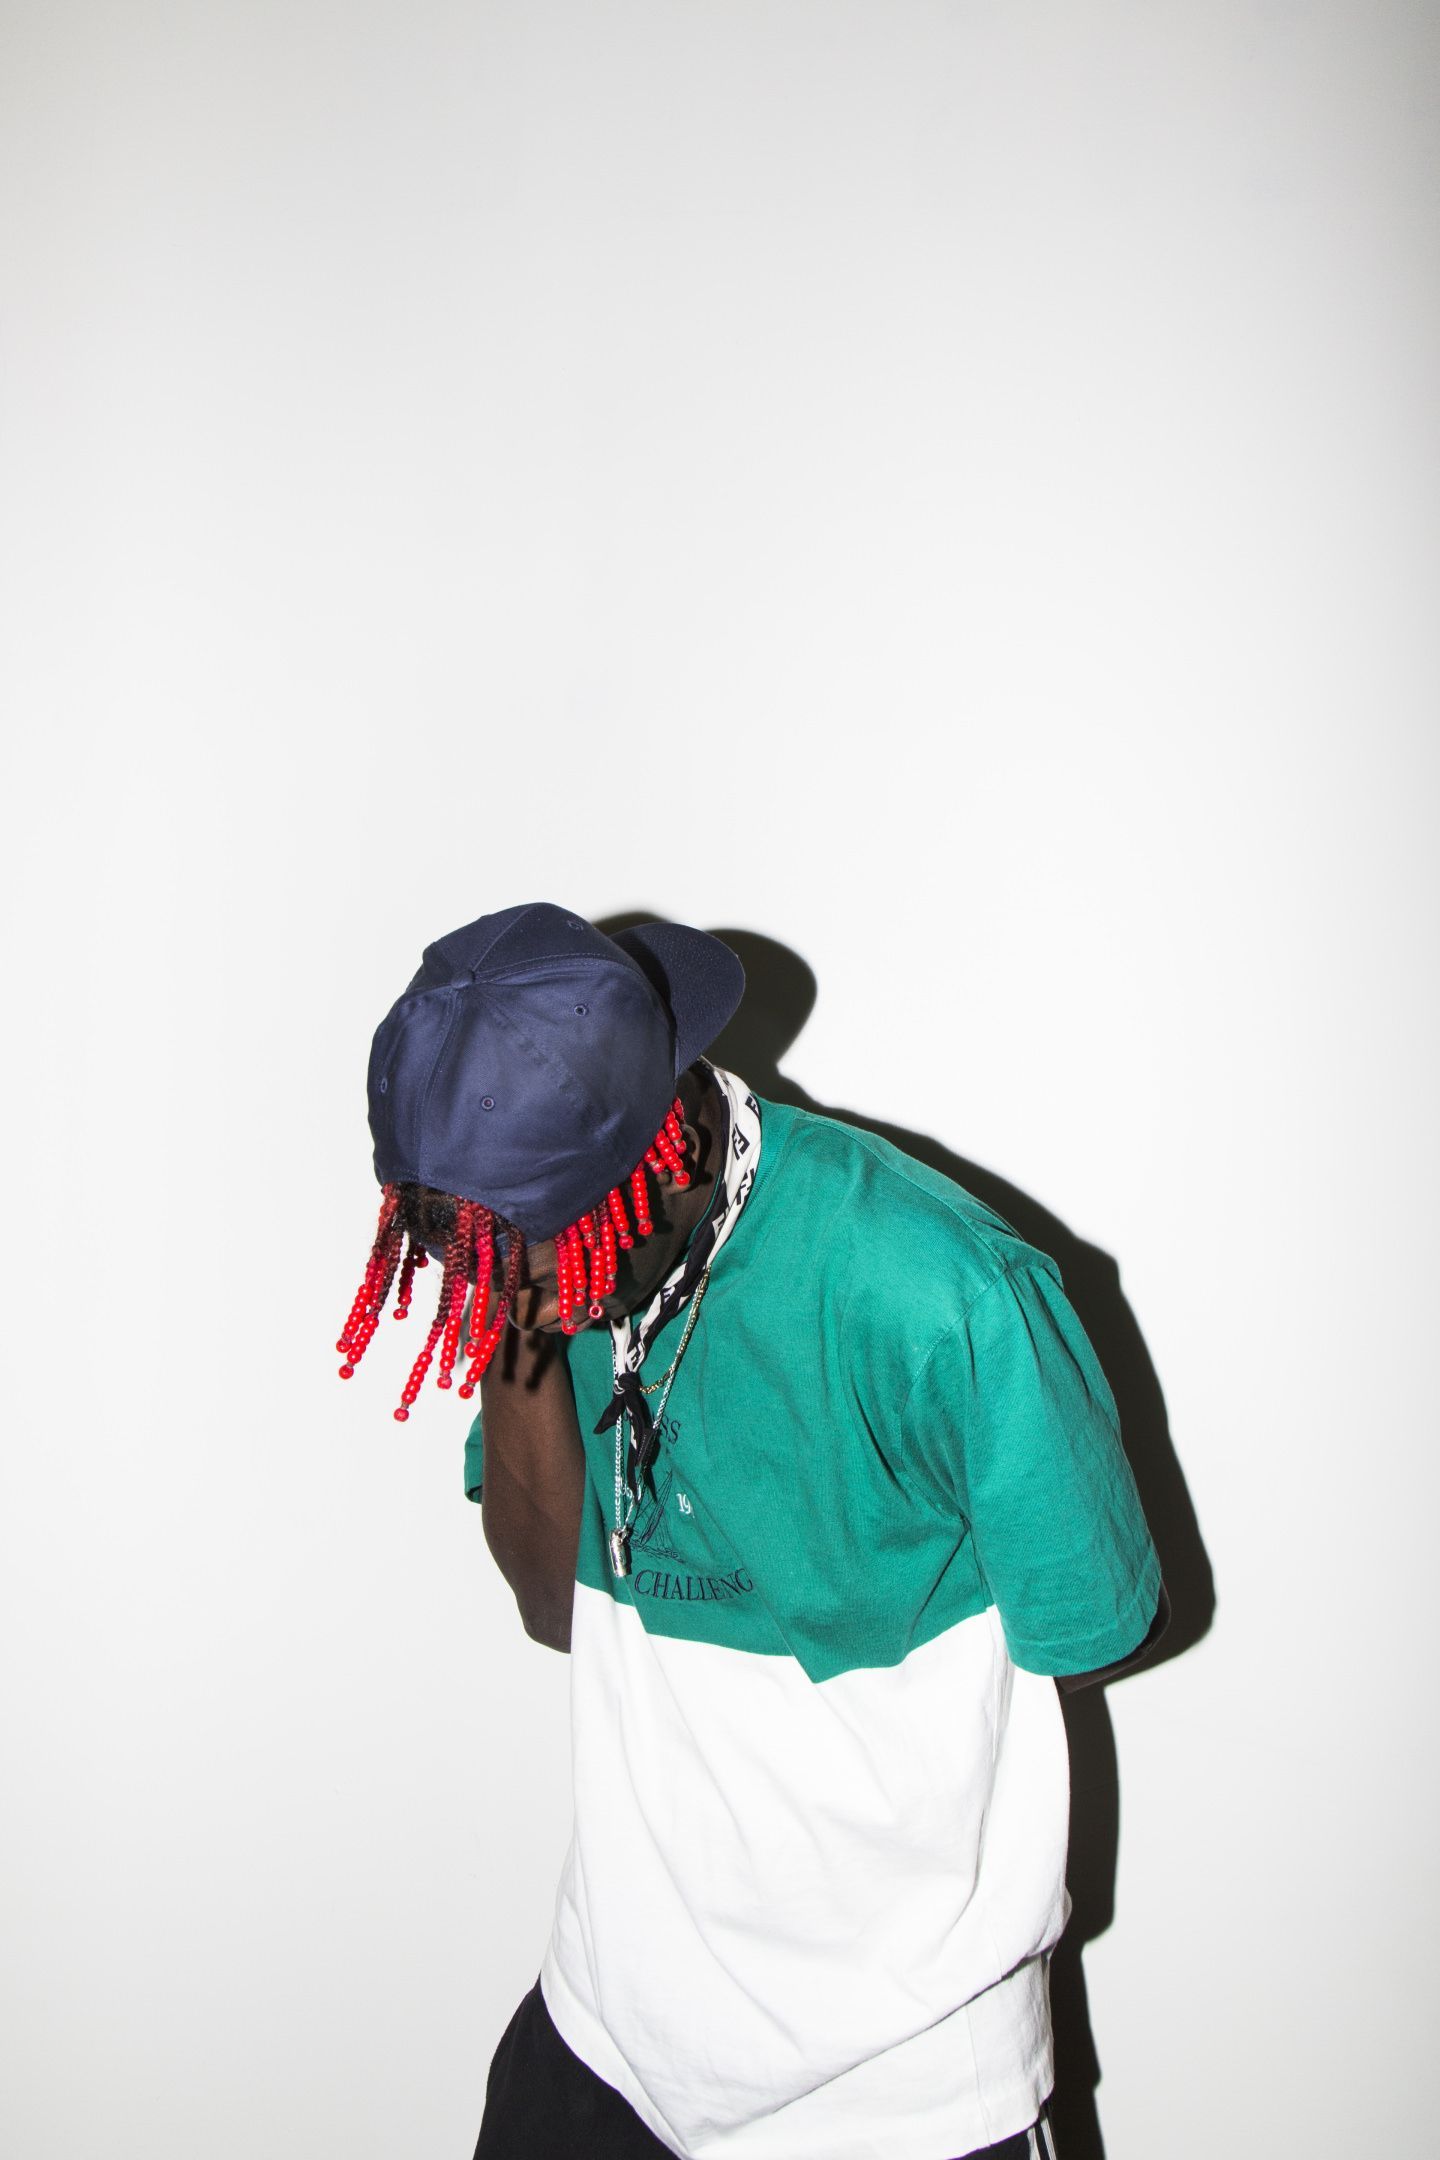 Lil Yachty iPhone Wallpaper Top